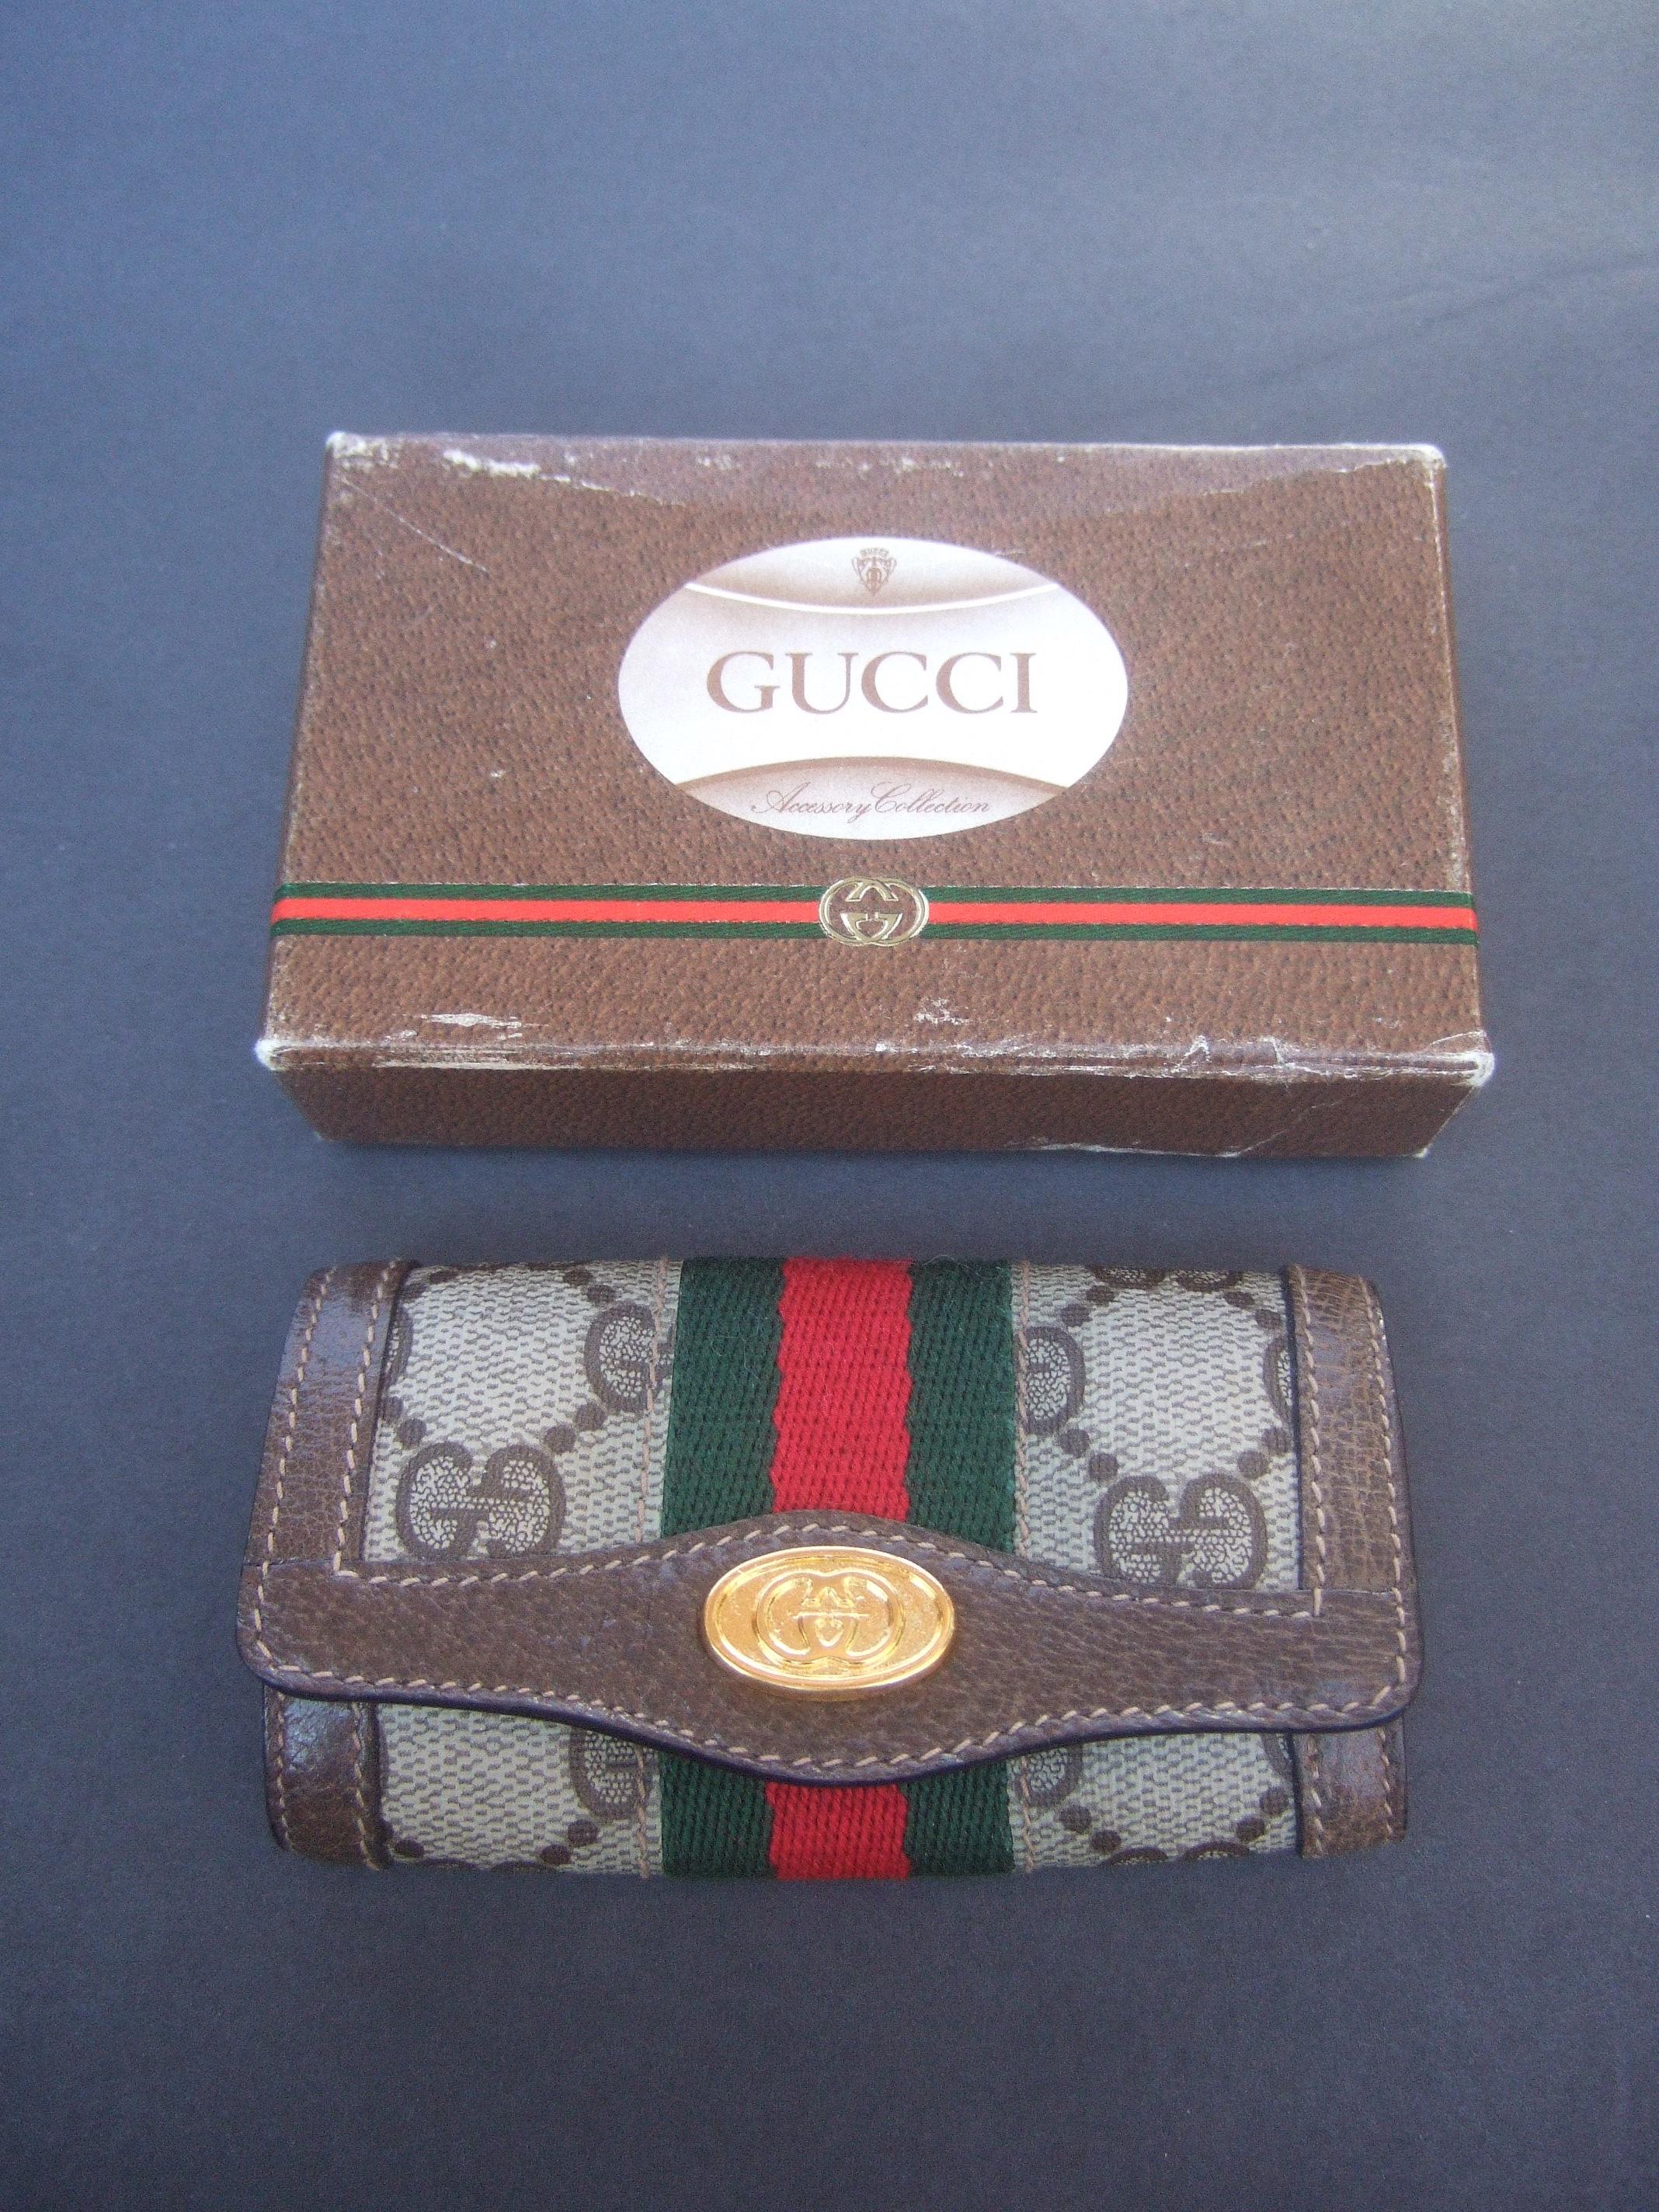 Vintage Gucci Accessory Collection Wallet - For Sale on 1stDibs